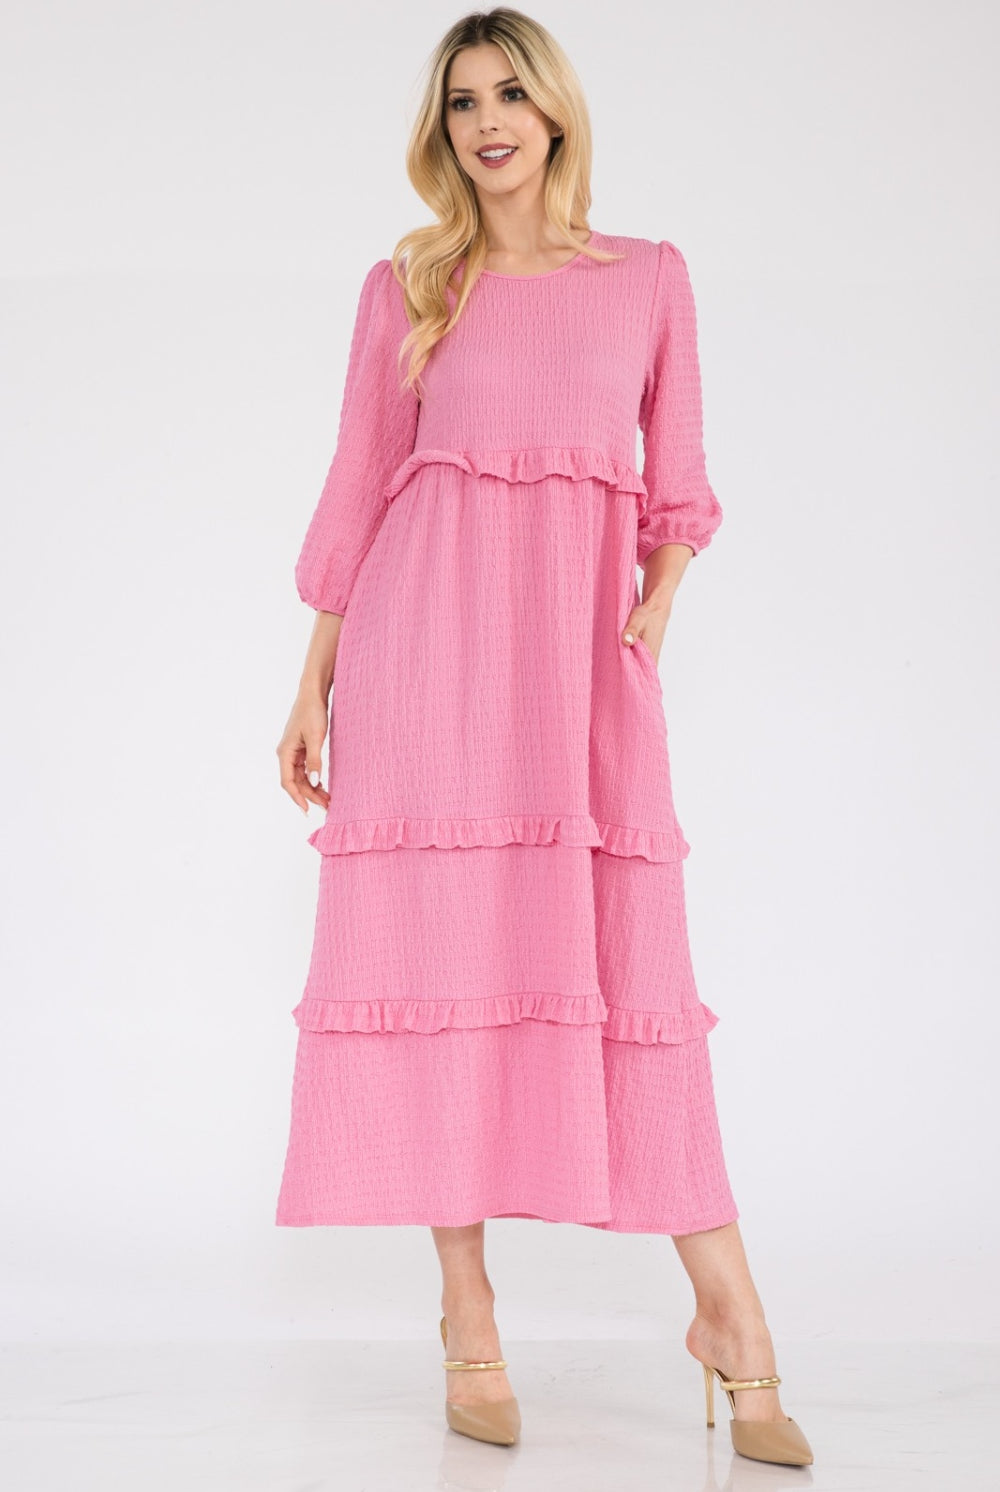 Woman wearing a pink tiered ruffle midi dress with long sleeves.